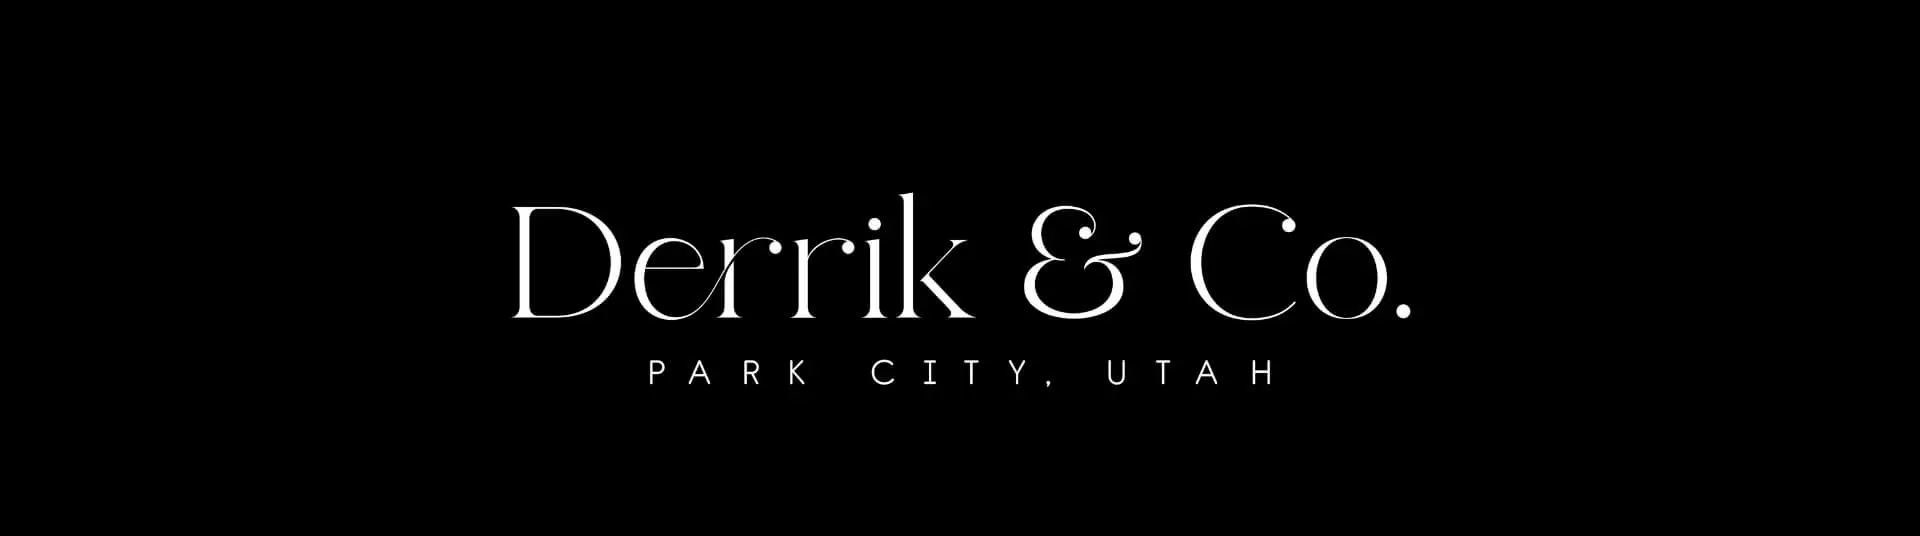 Top Park City Real Estate Team with Derrik Carlson, Holly Carlson, and Grayson West